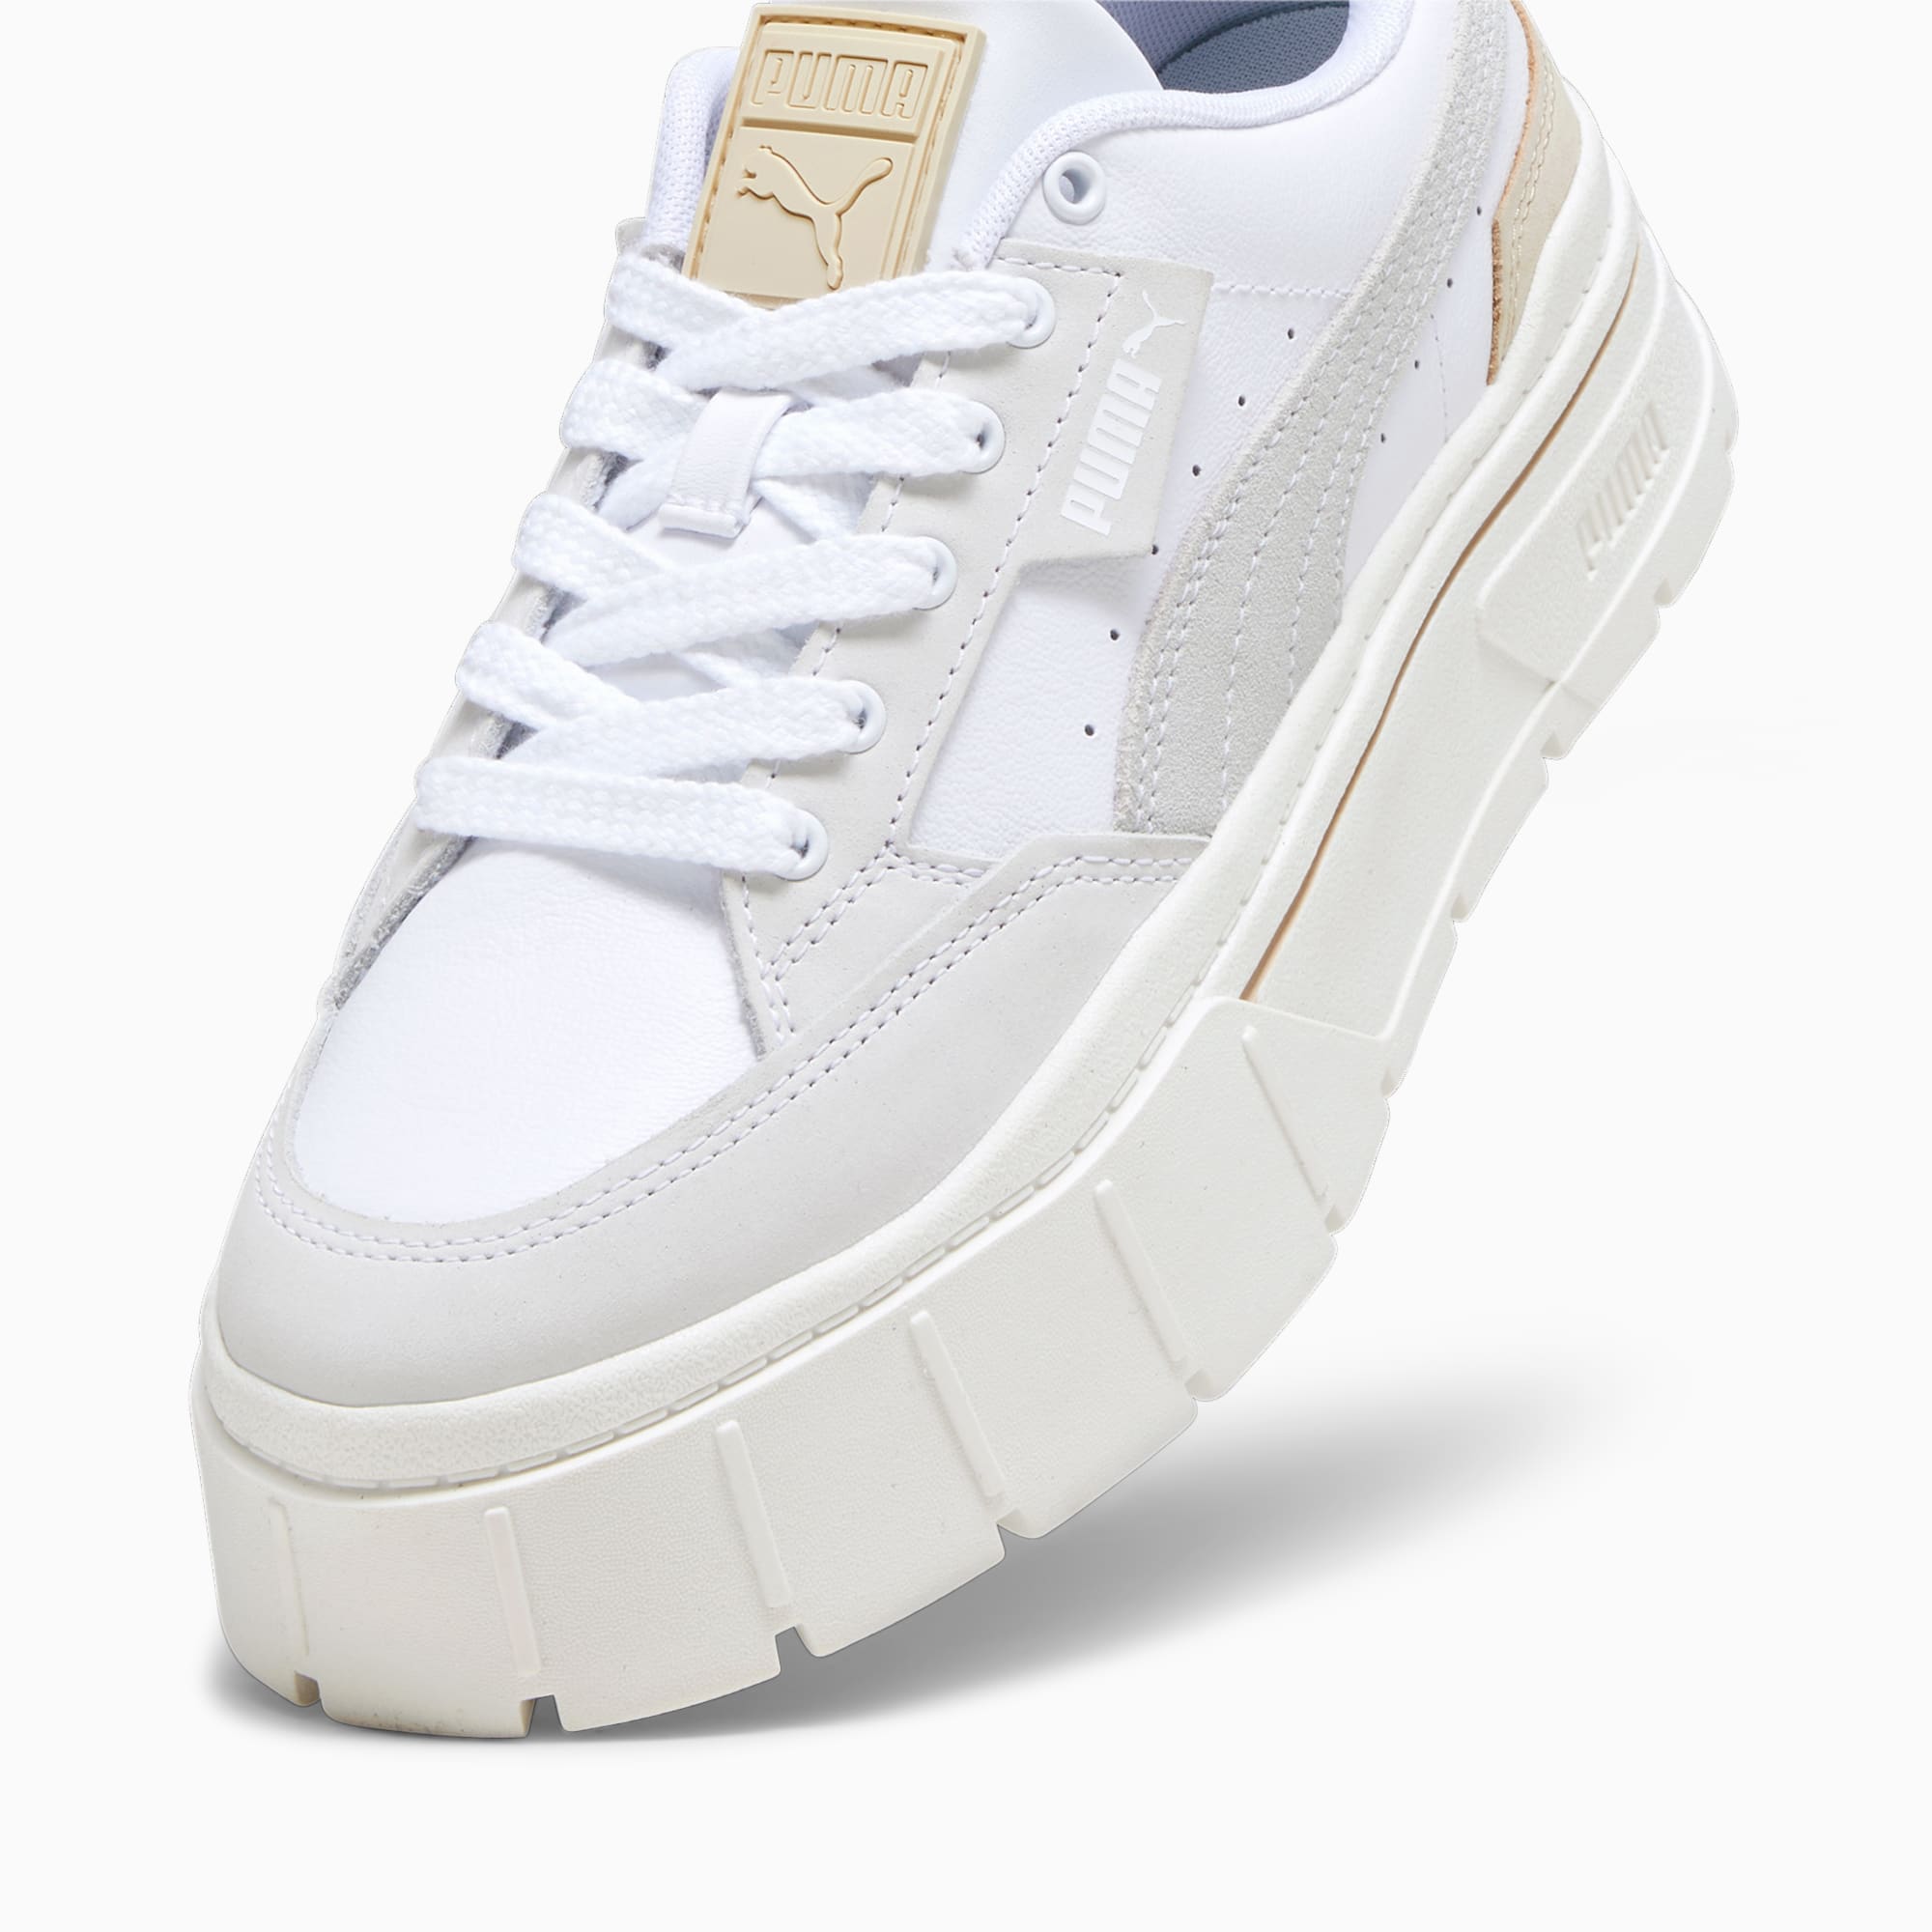 Puma Mayze Stack cord detail sneakers in white and varsity green